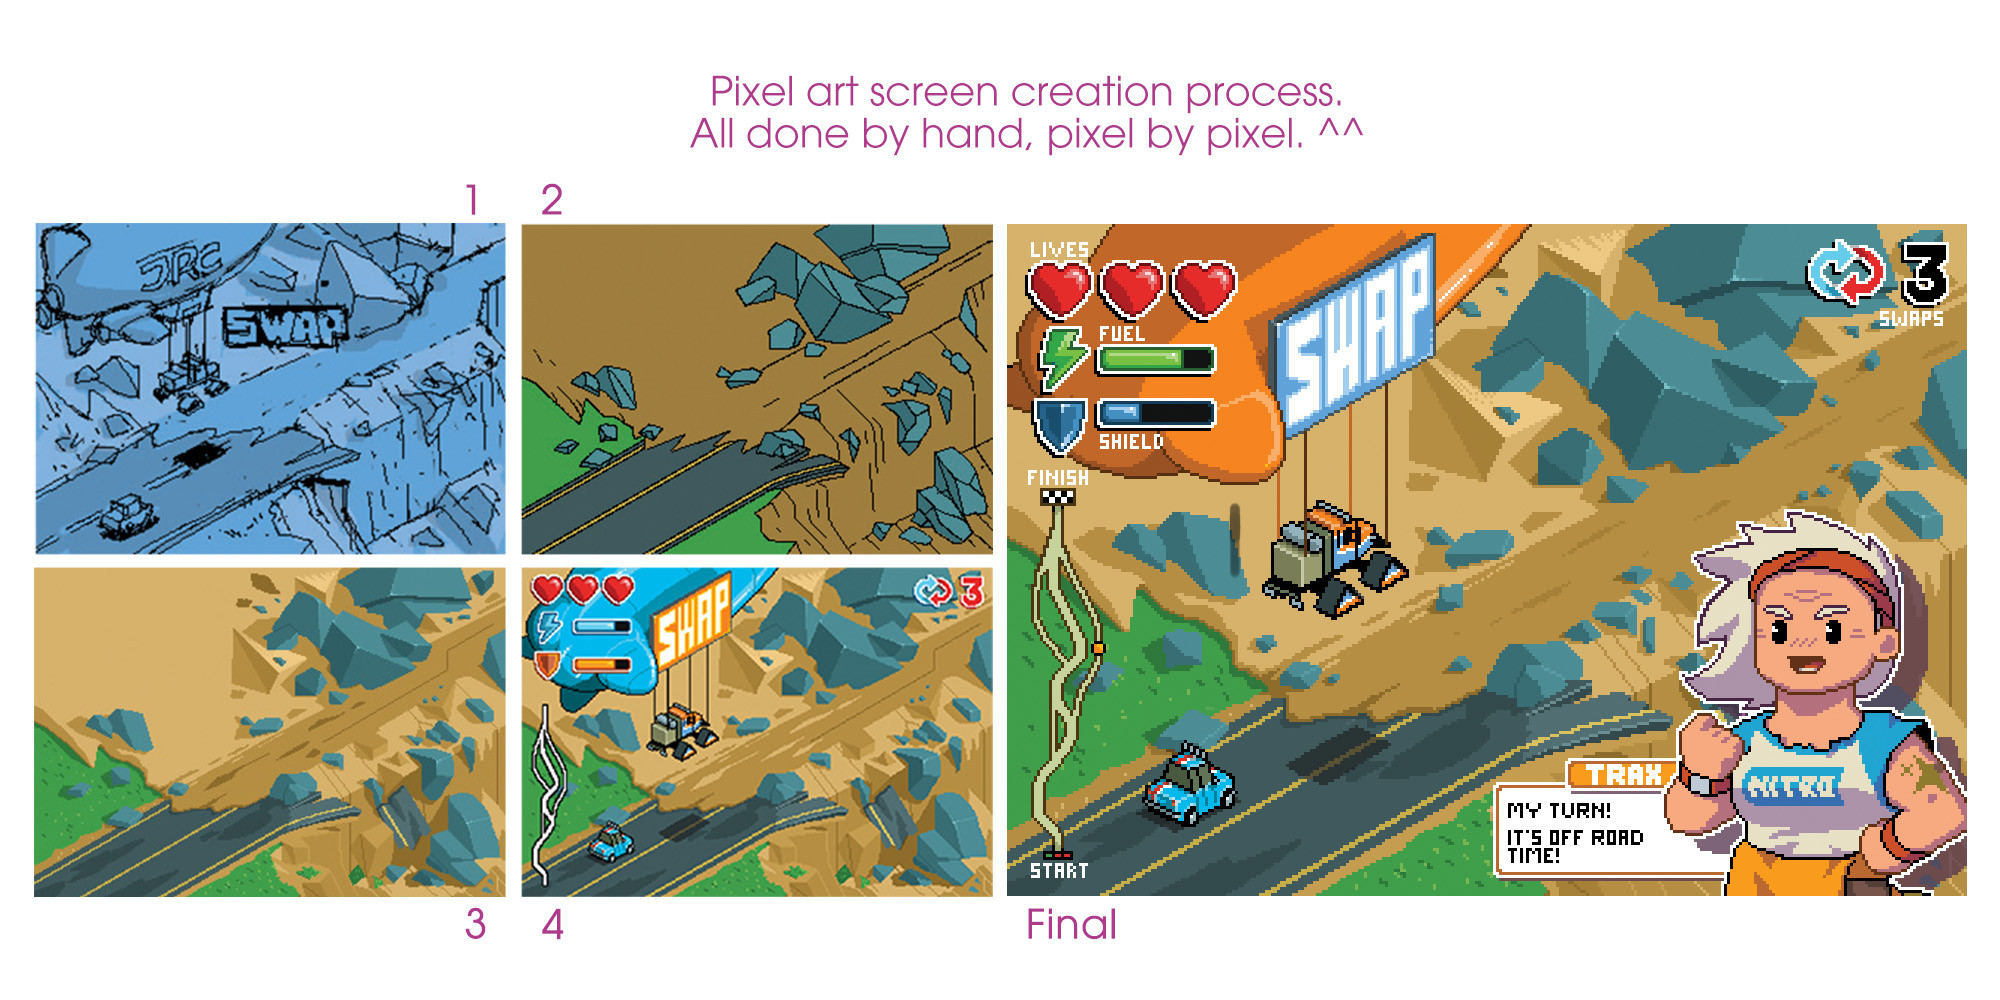 Step by step o the pixel art screen made especially for the cabinet. The challenge was to imagine and come up with the gameplay in order to put together a proper and believable User interface.